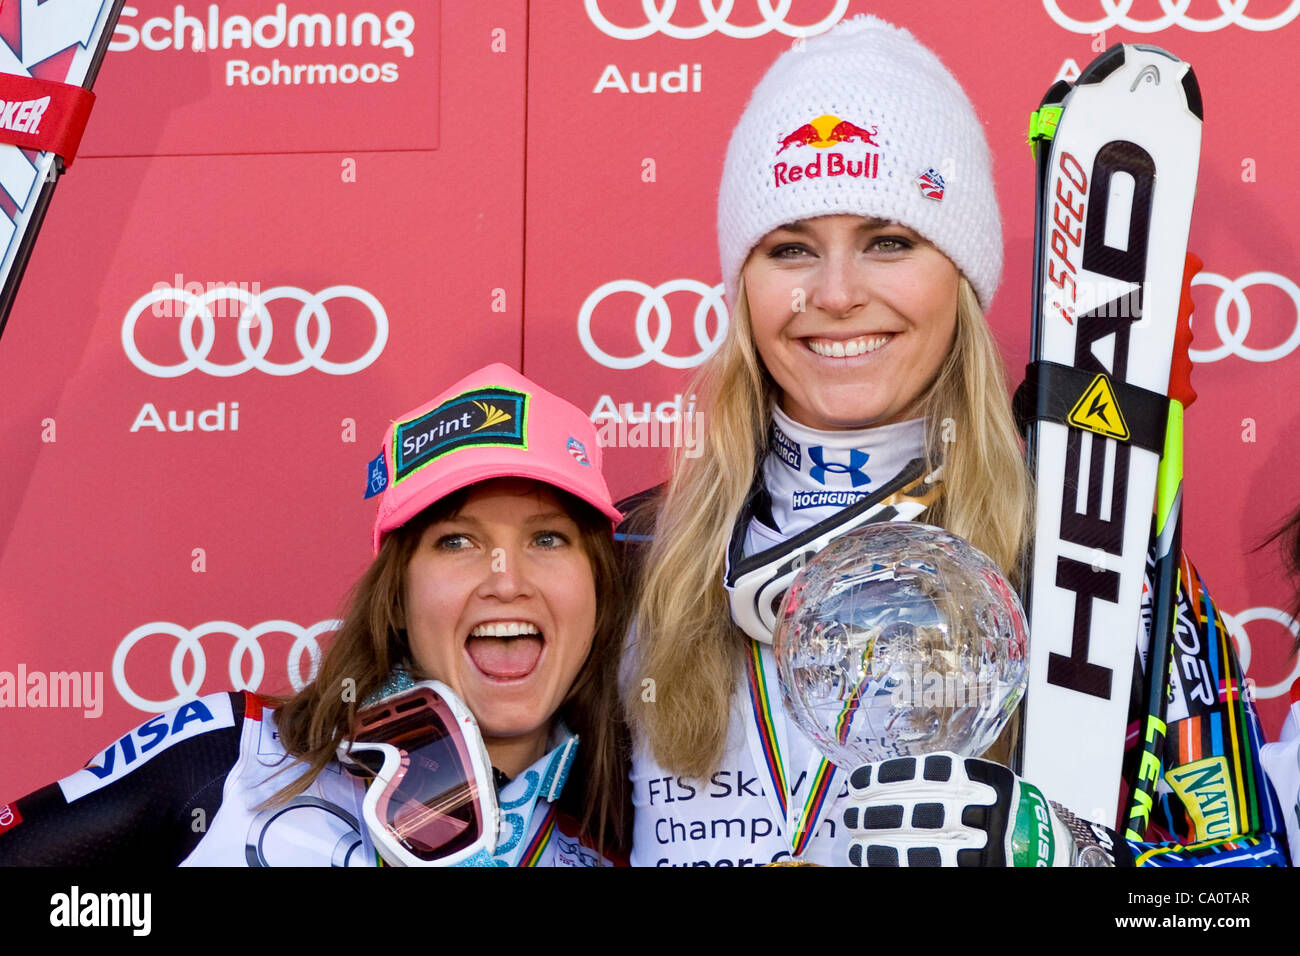 15th March 2012 Julia Mancuso (L) 2nd and Lindsey vonn (R) winner, on the podium for the Super G overall title, at the FIS Alpine Skiing World Cup finals held at Schladming Austria Stock Photo